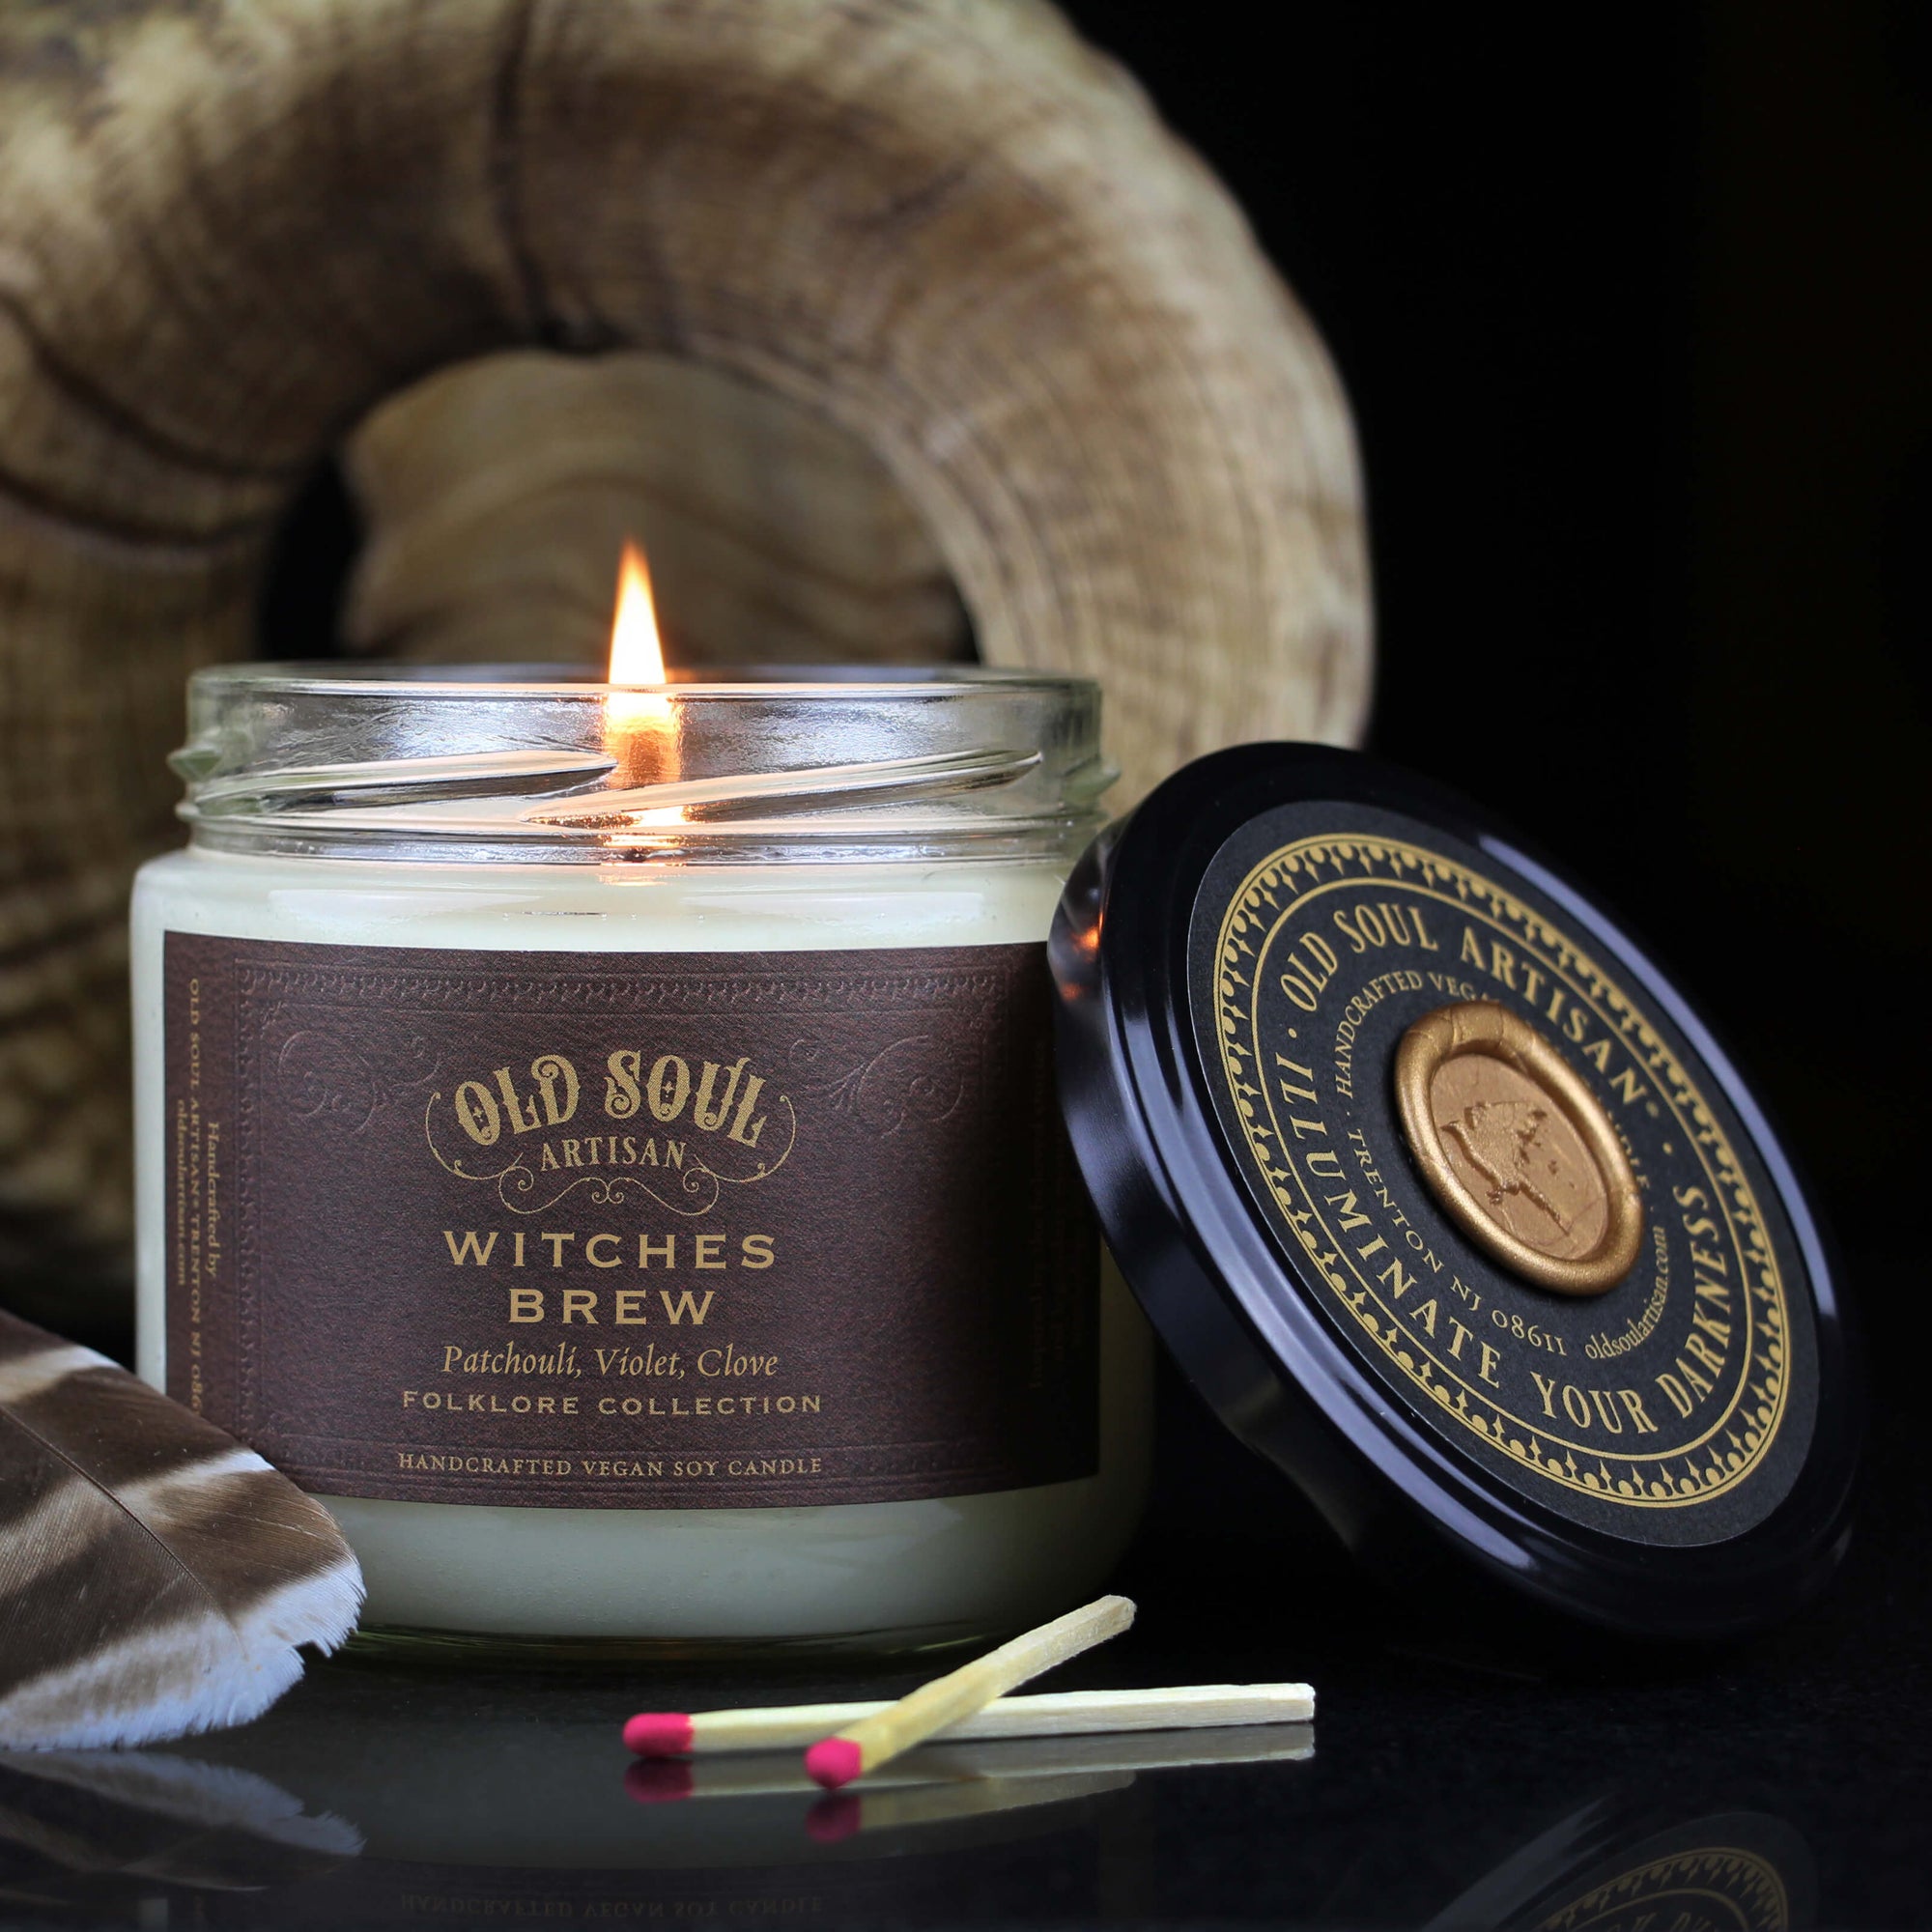 Fireside Frankincense Soy Candle – Eden Daily Essentials